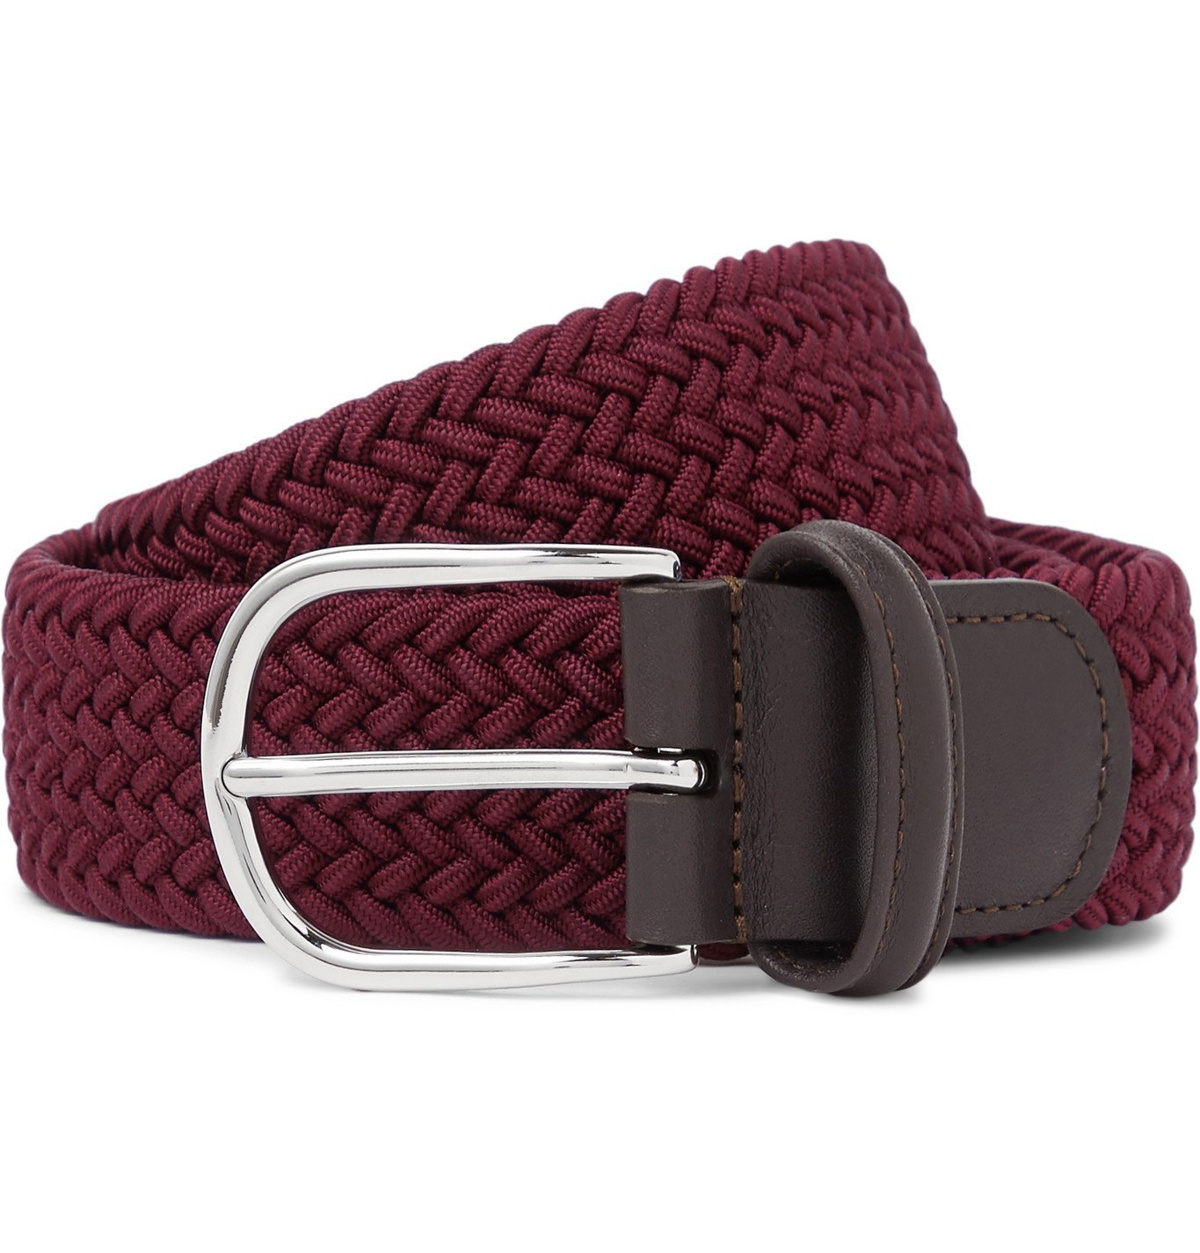 Anderson's - 3.5cm Leather-Trimmed Woven Elastic Belt - Burgundy Anderson's